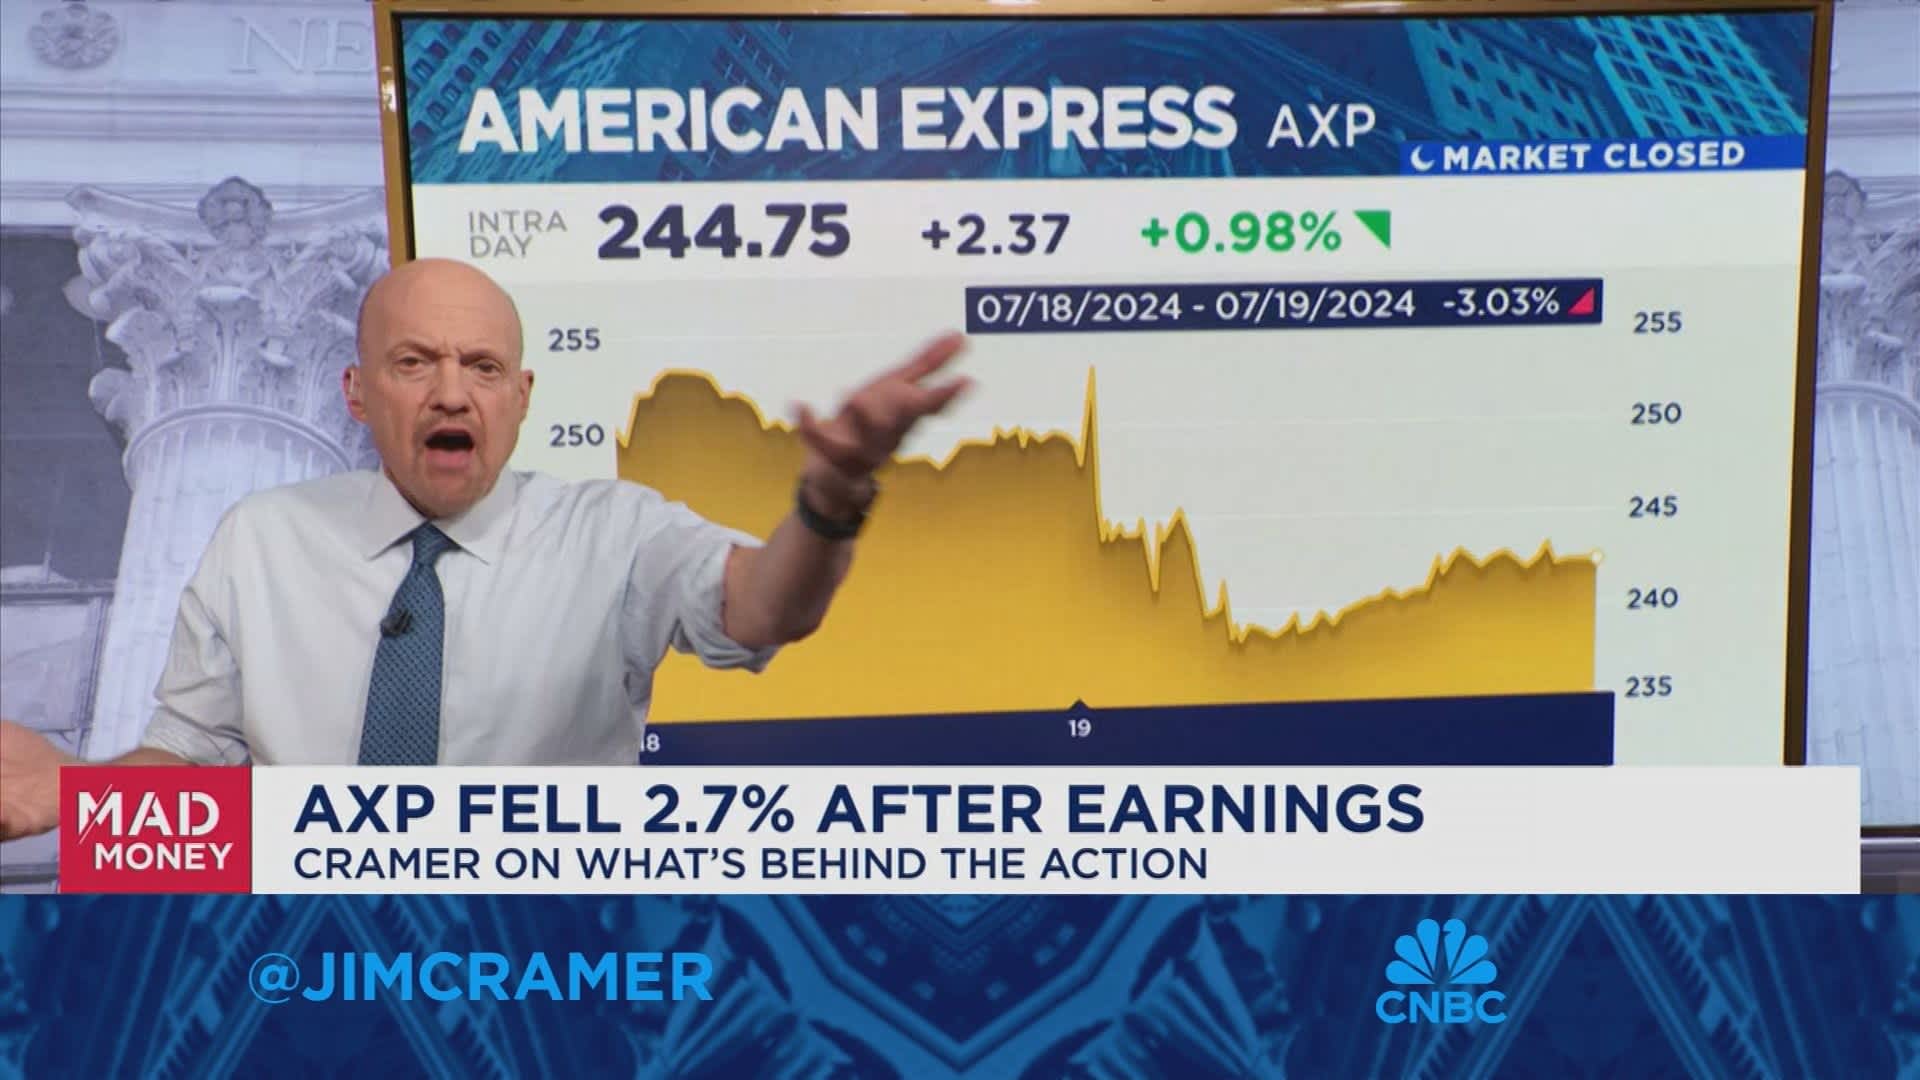 American Express isn’t getting enough credit for its remarkable earnings growth, says Jim Cramer [Video]